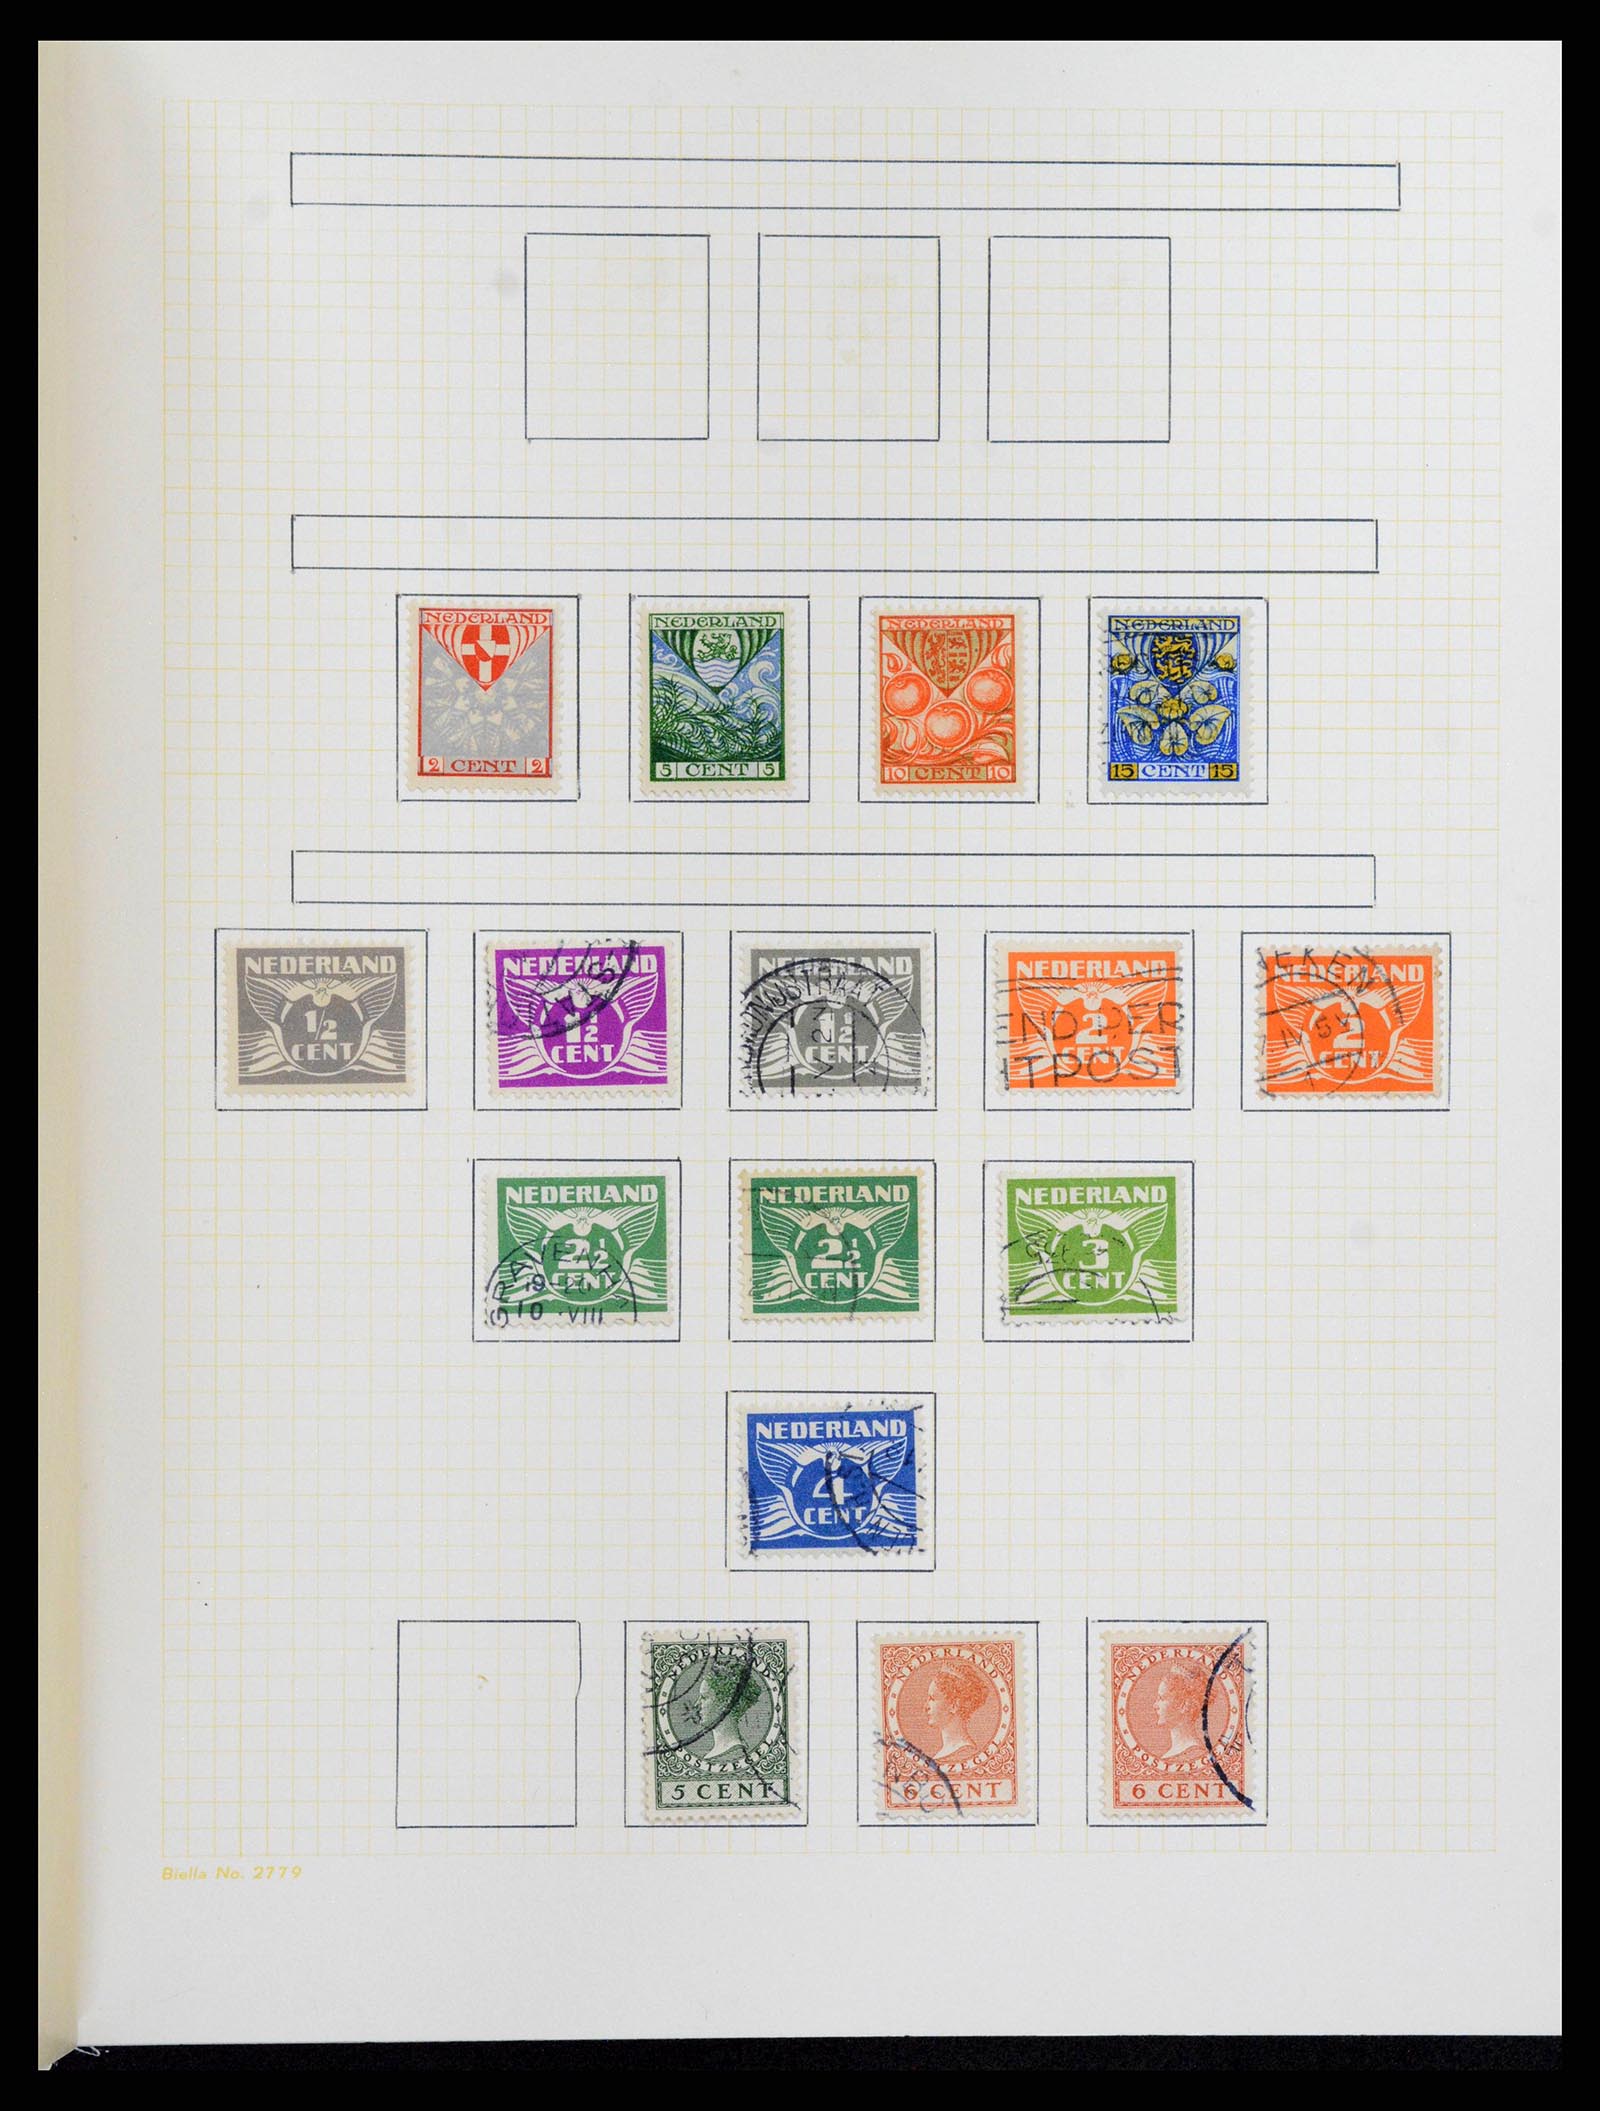 38602 0020 - Stamp collection 38602 Netherlands and territories 1852-1975.